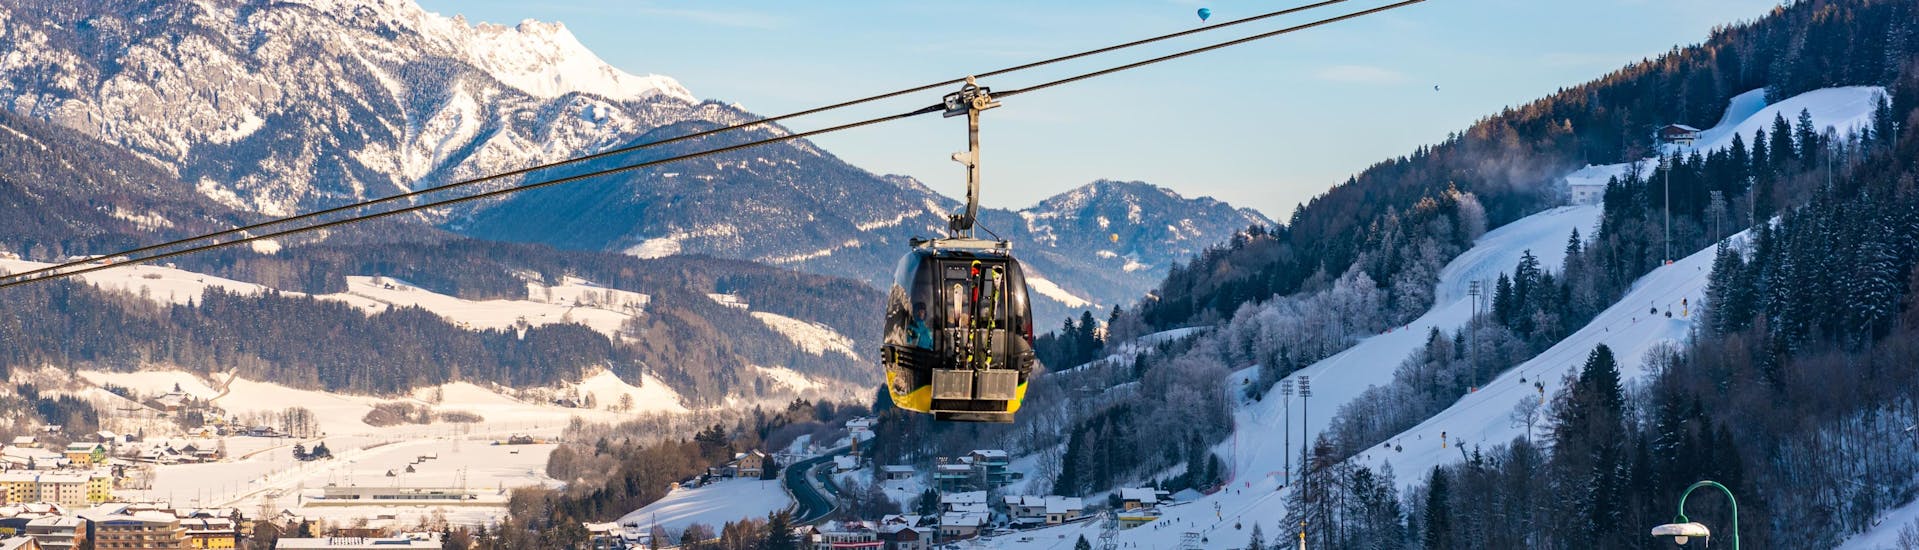 A cable car is suspended over the town of Schladming, a popular destination for ski schools that offer ski lessons in the Ski Amadé Schladming Dachstein region.